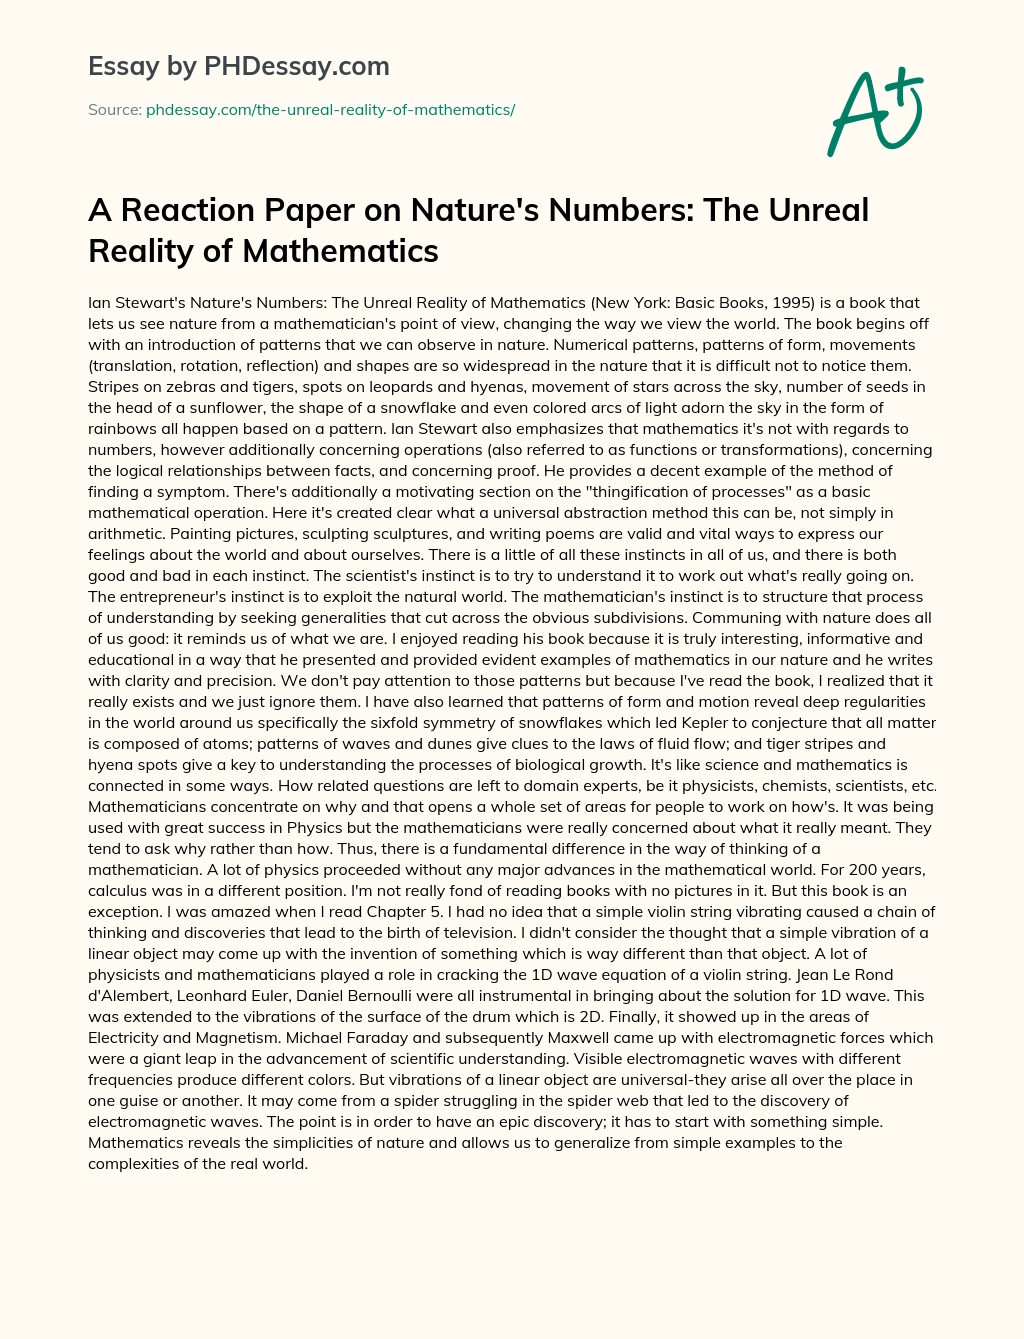 A Reaction Paper on Nature’s Numbers: The Unreal Reality of Mathematics essay